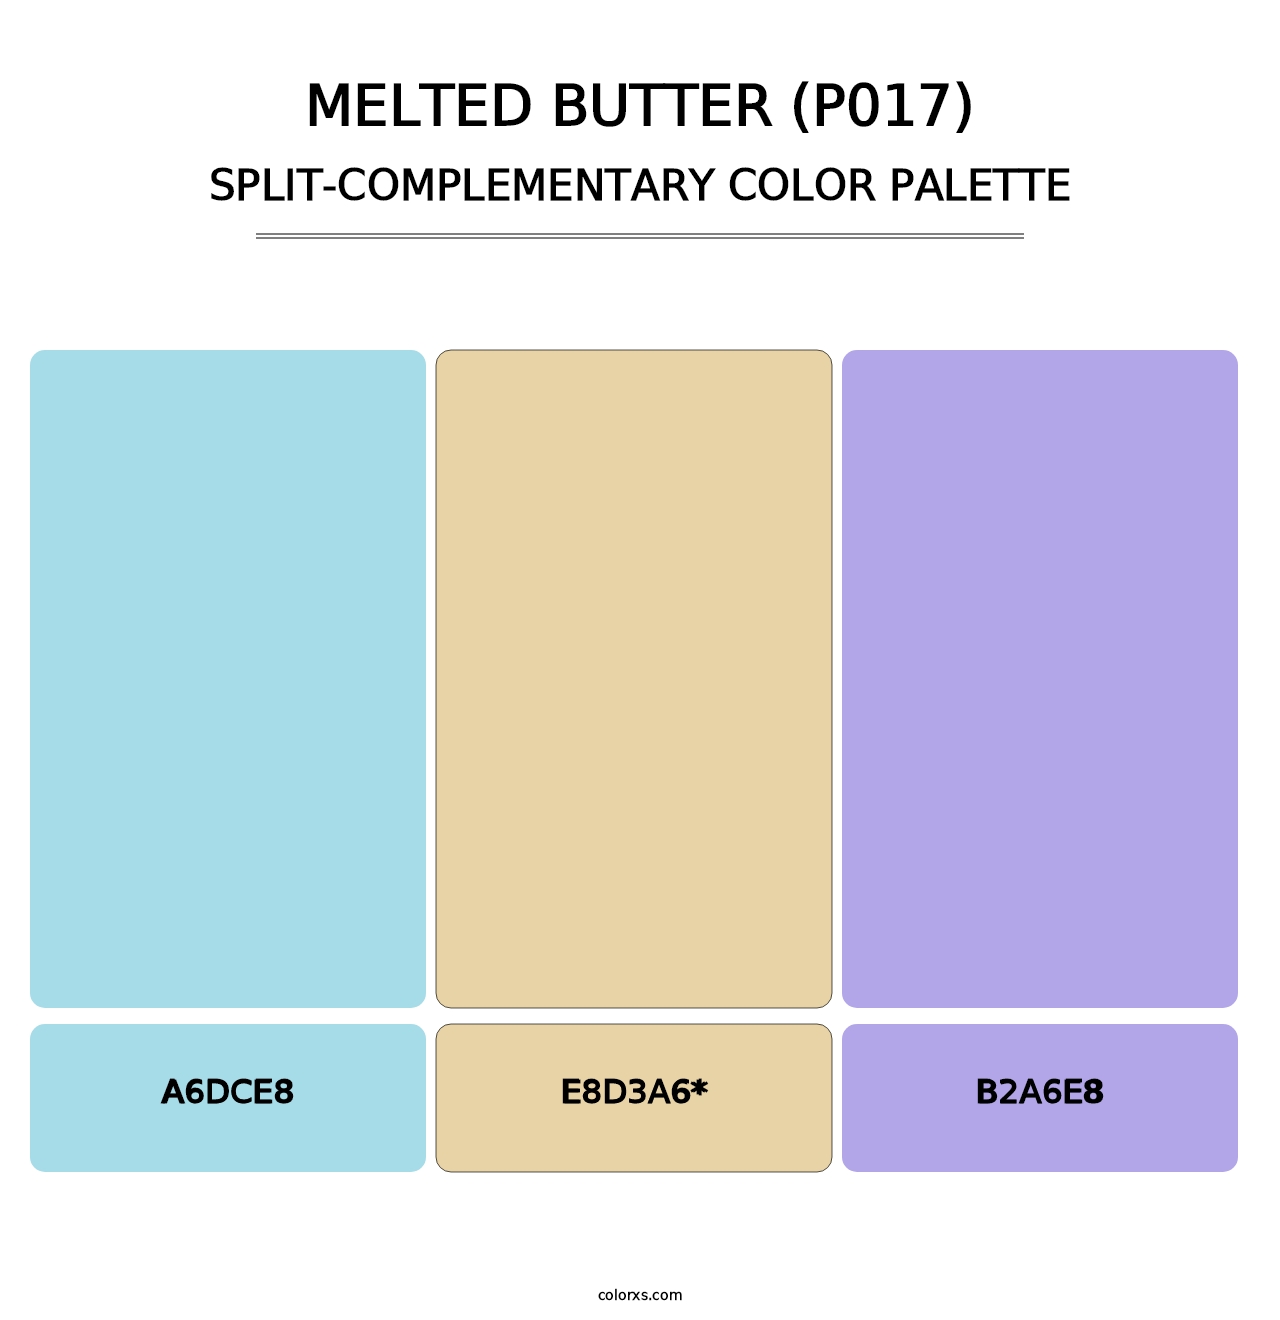 Melted Butter (P017) - Split-Complementary Color Palette